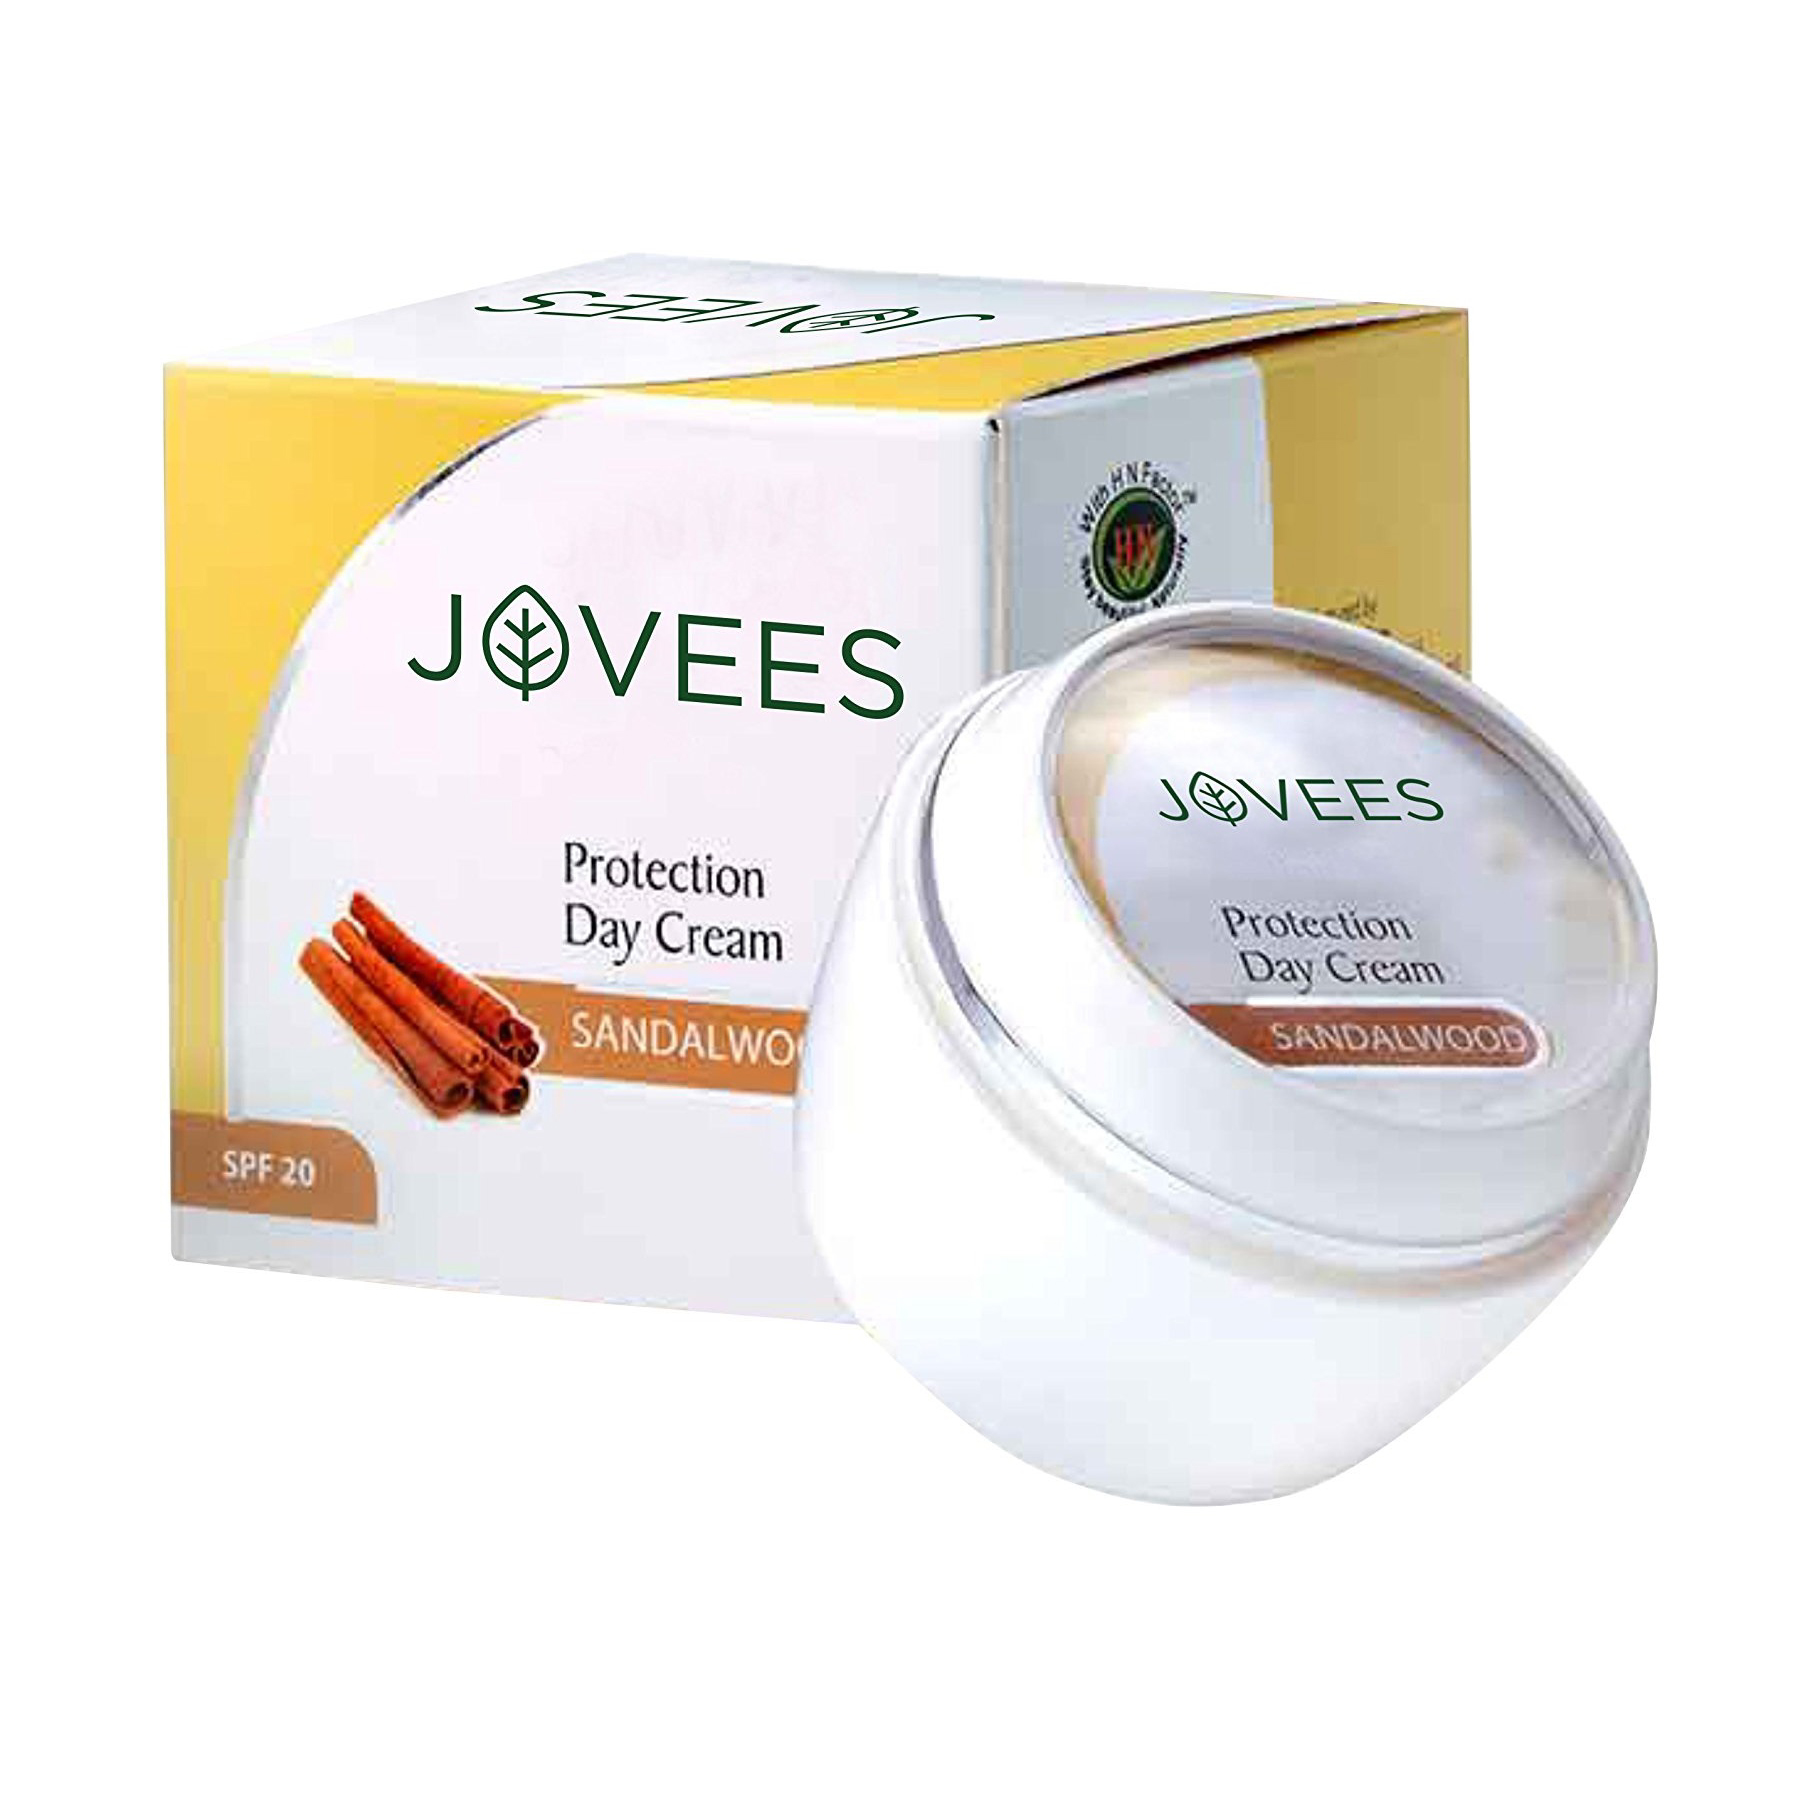 Jovees Protection Day Cream